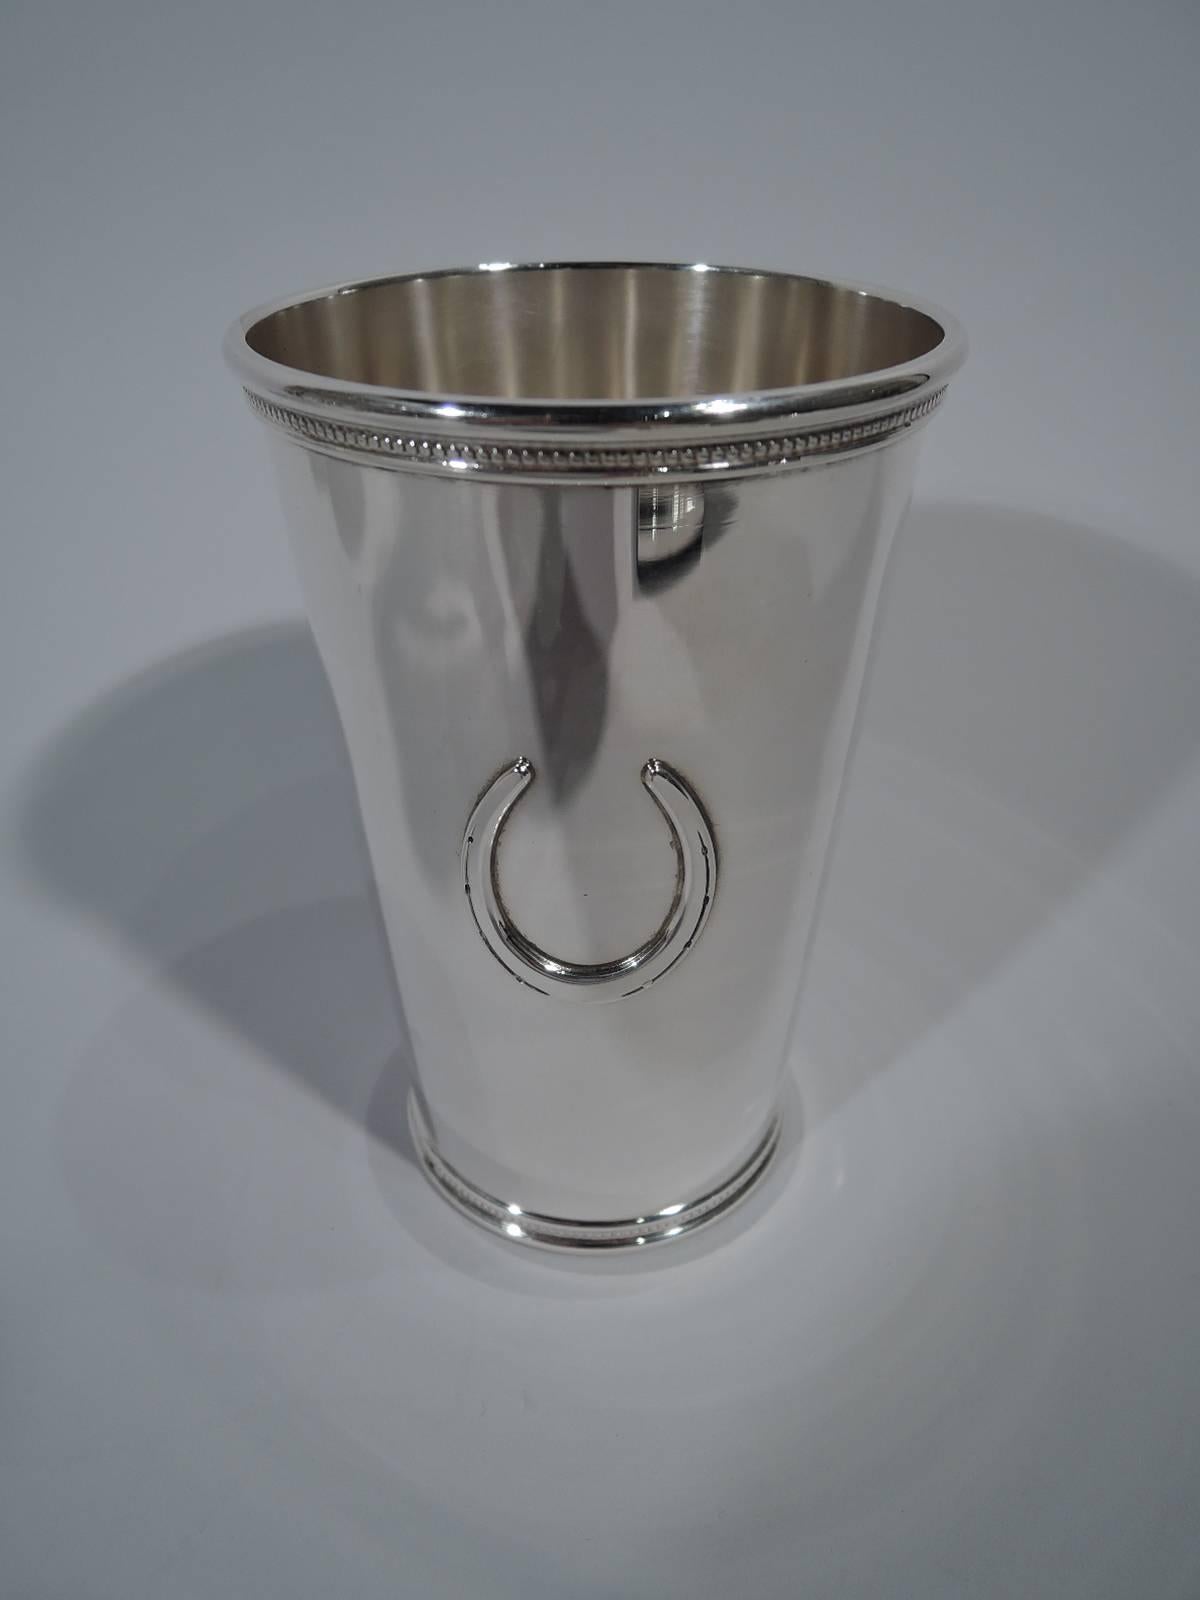 Set of four sterling silver highballs. Made by Scearce in Shelbyville, Kentucky. Straight and tapering sides. Rim and base molded with flat beading. Horseshoe applied to side. Great for seasonal horsey events. Hallmark includes presidential date